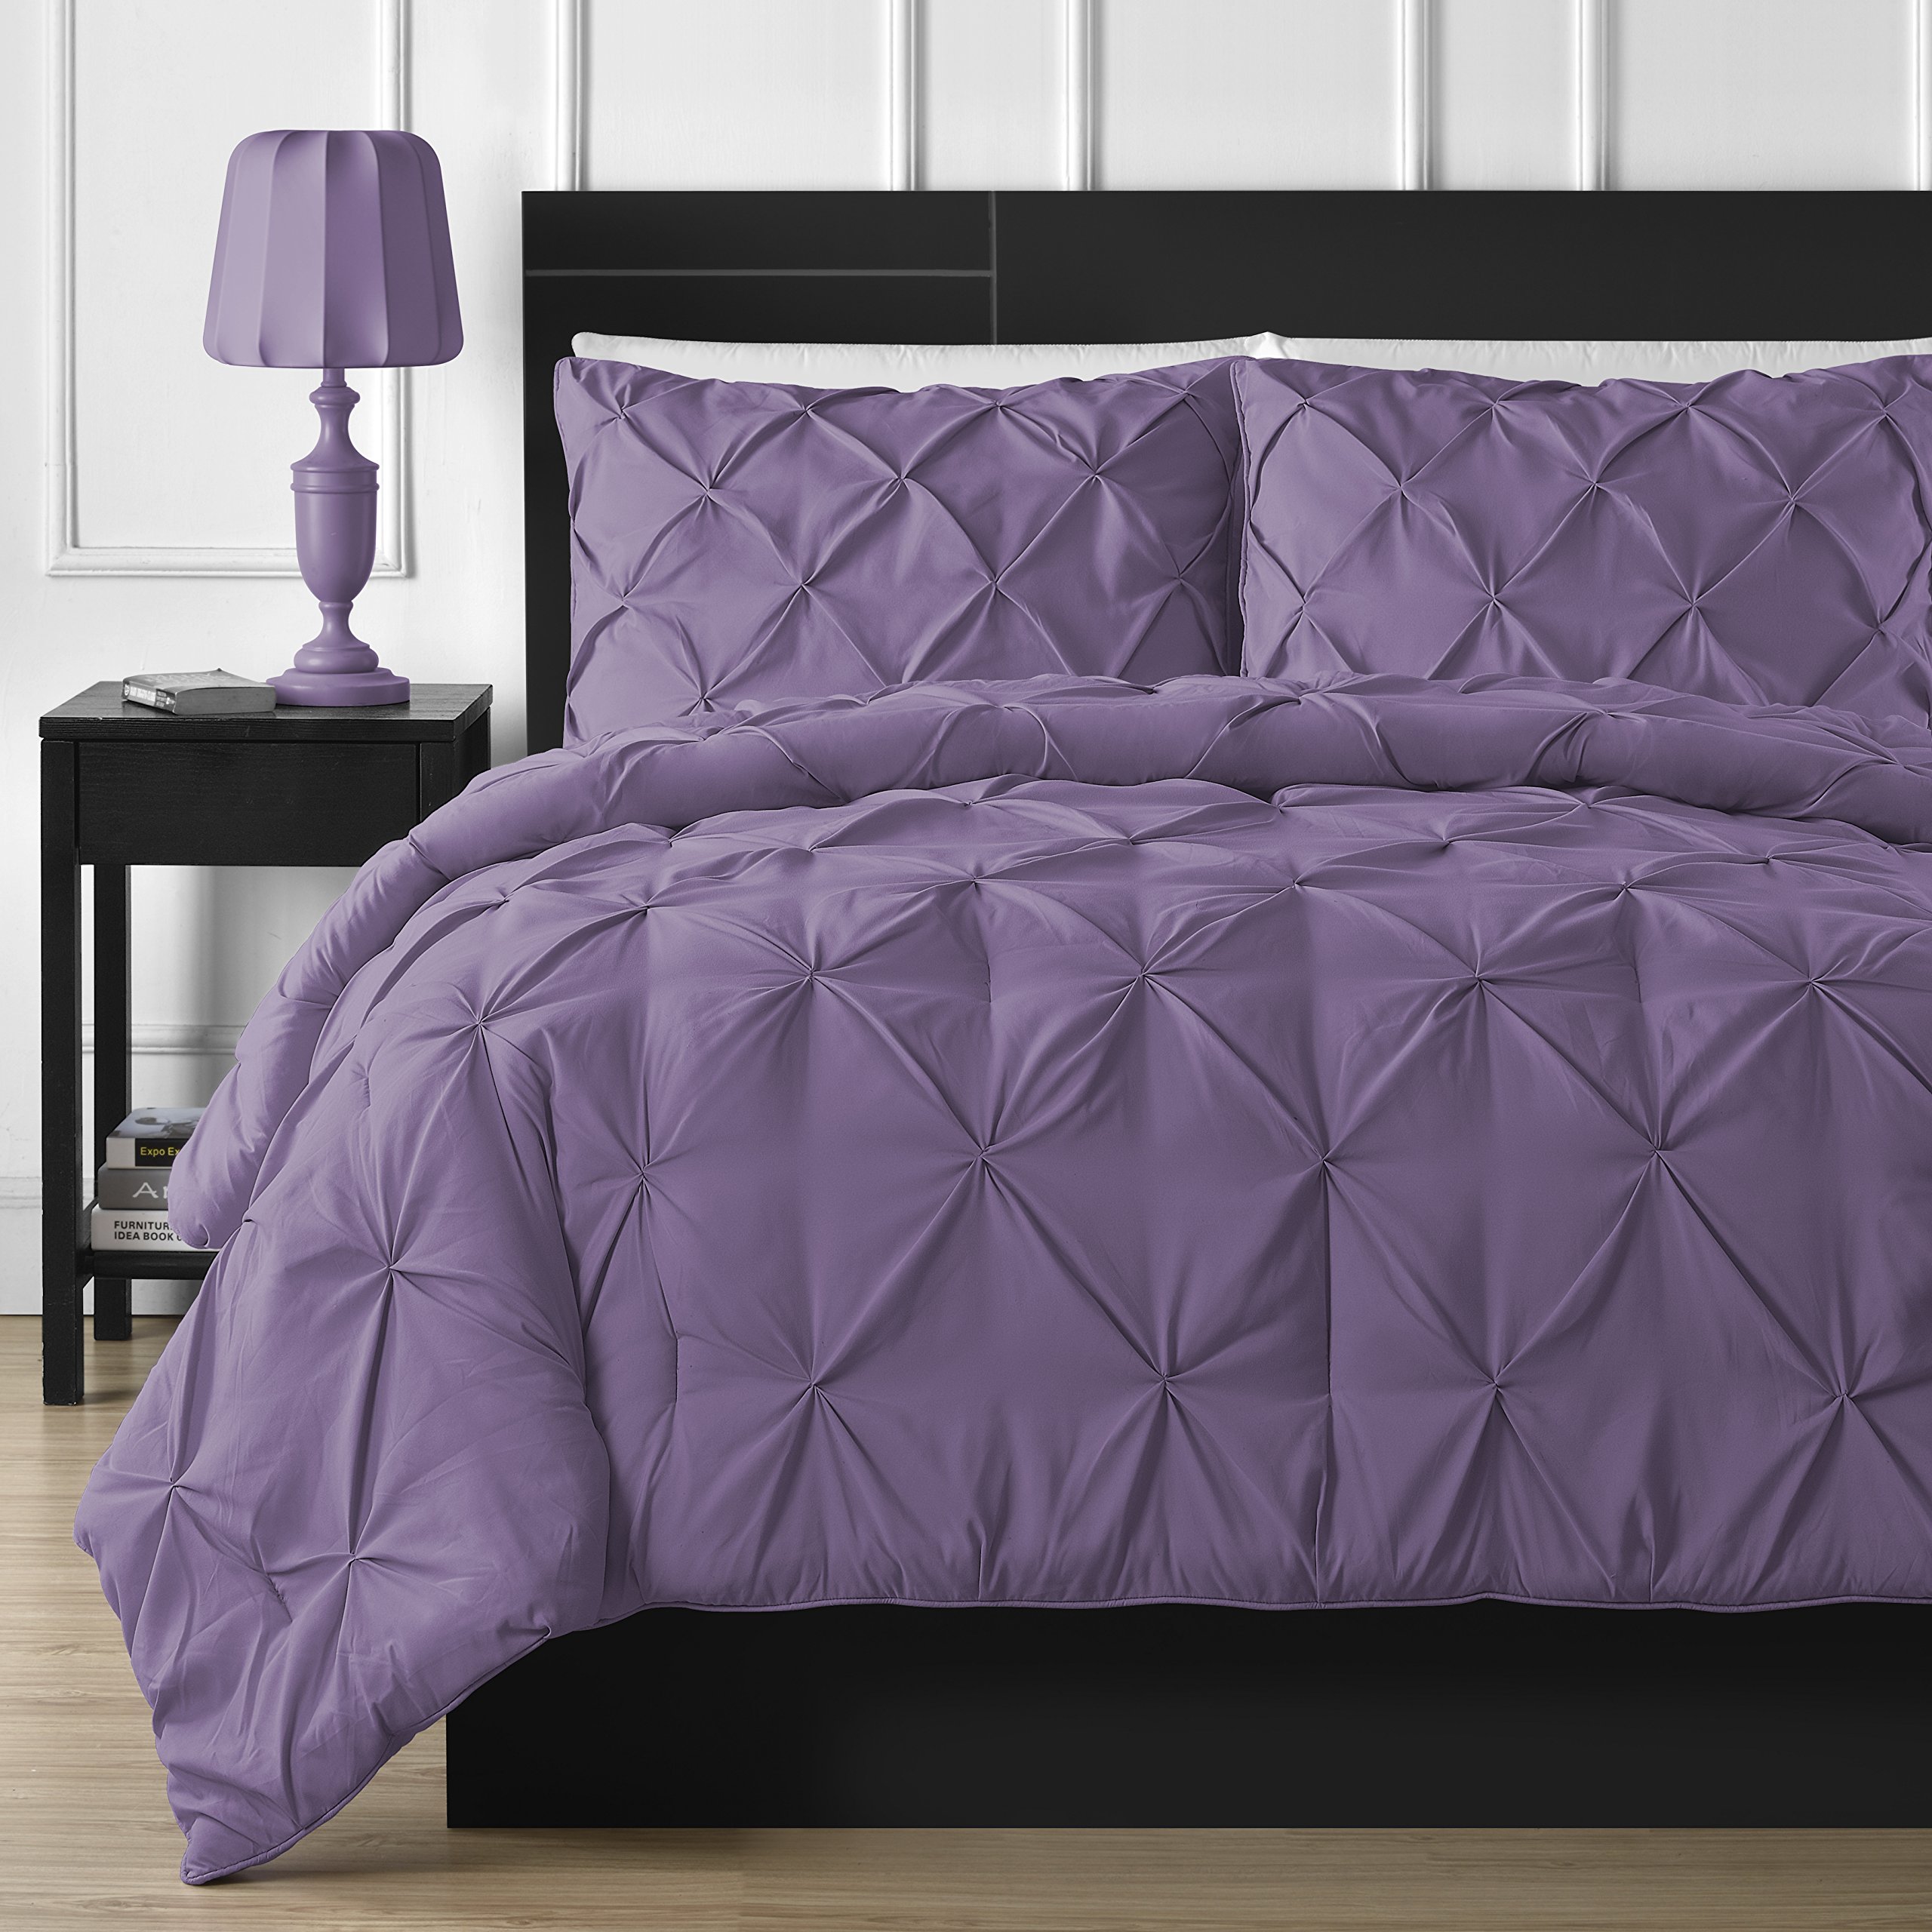 Book Cover Comfy Bedding Double Needle Durable Stitching 3-Piece Pinch Pleat Comforter Set All Season Pintuck Style, Full, Purple Full Purple